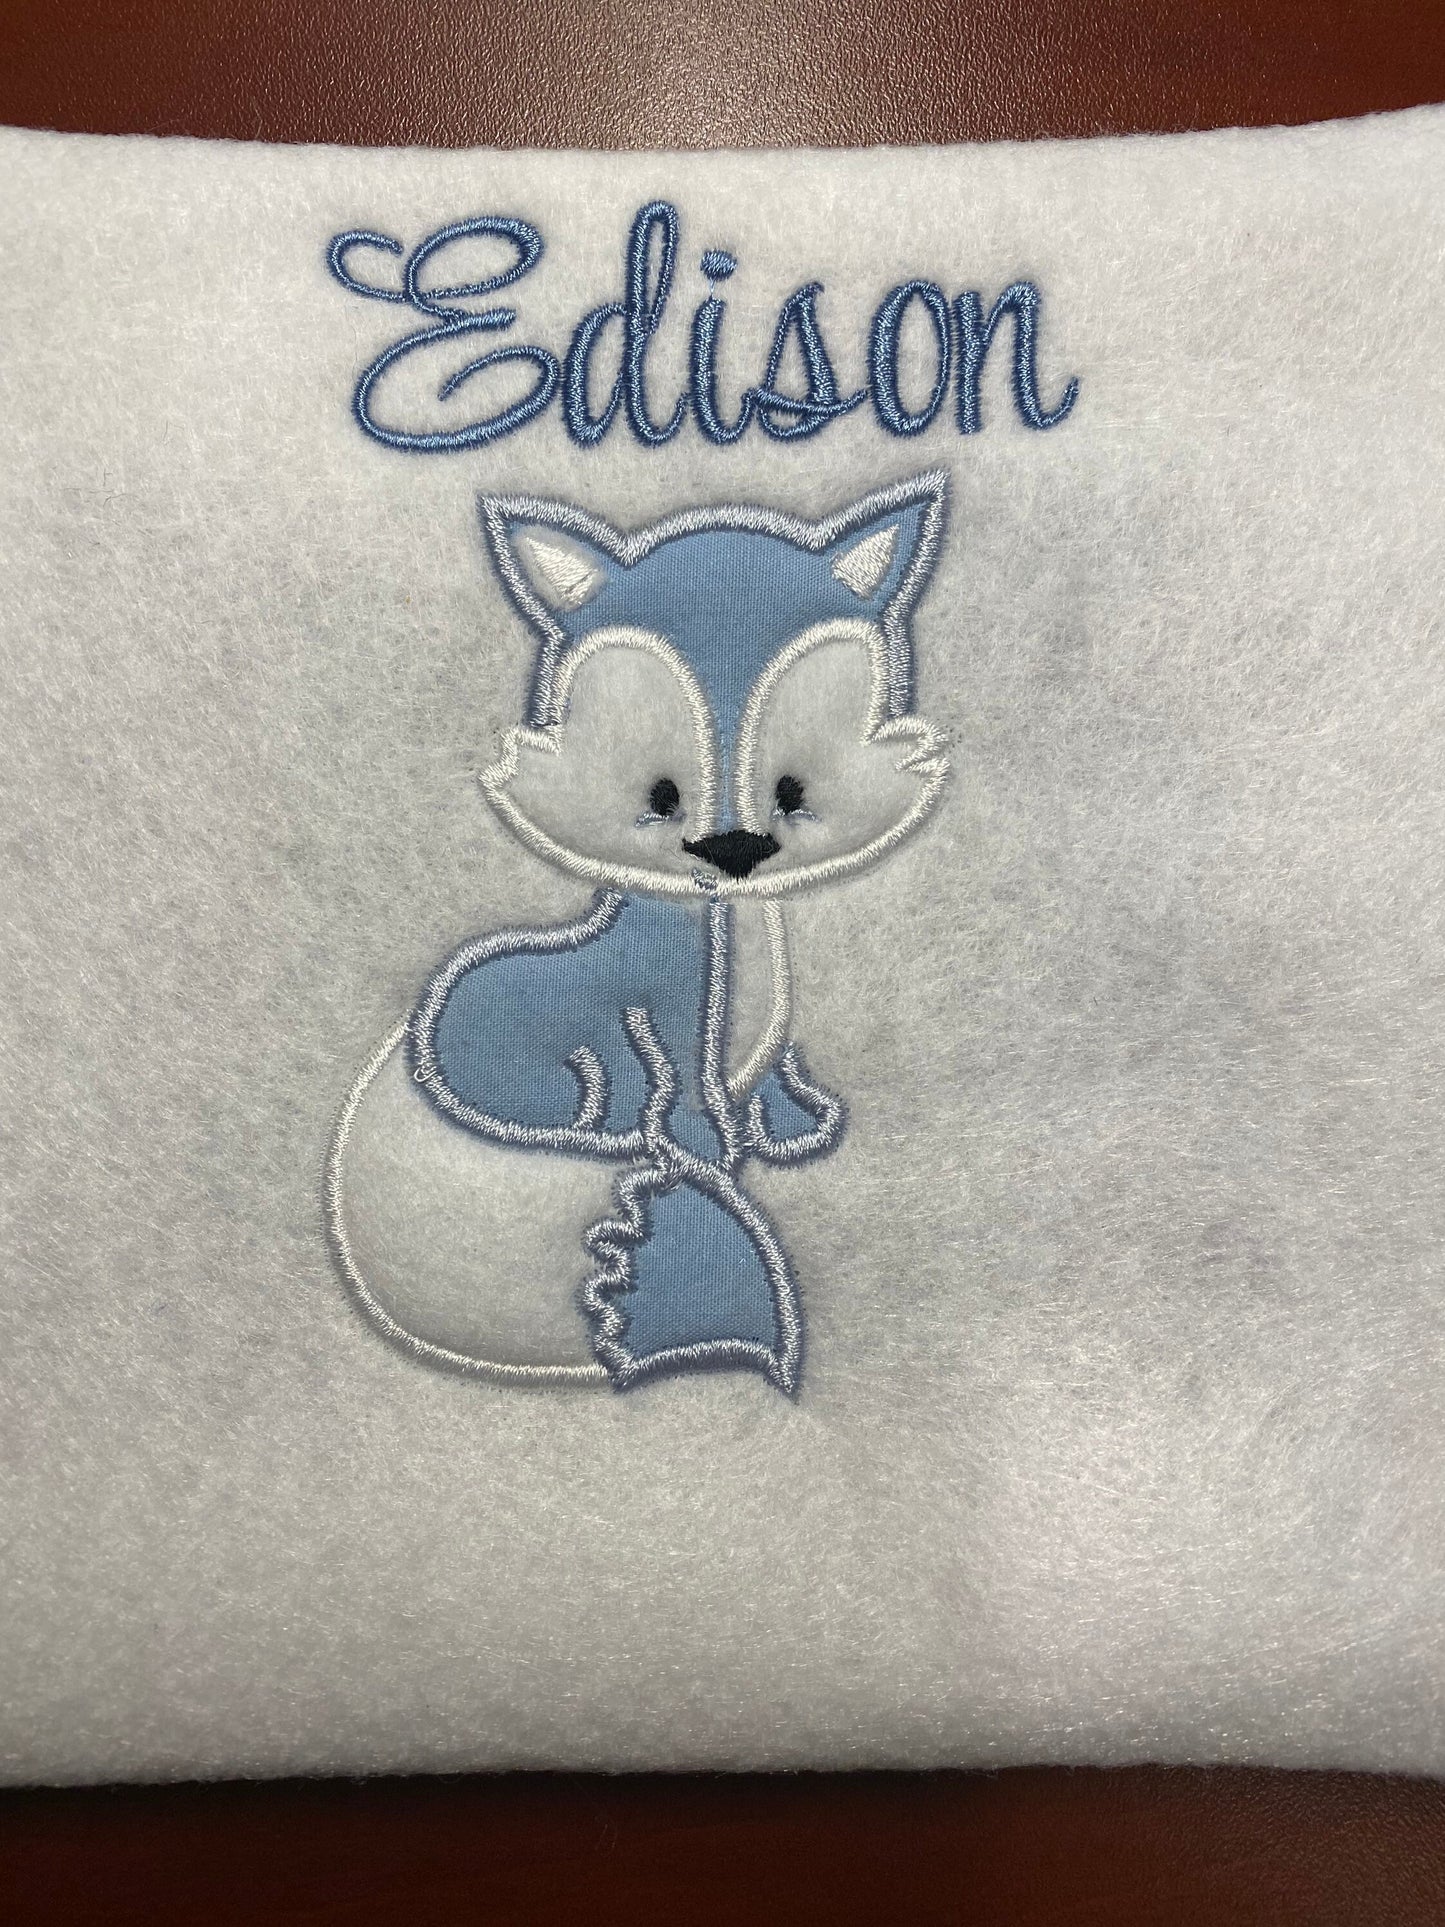 Custom Applique Fox children boys girls t-shirt  Name embroider hand made best seller bestselling present most popular personalized gift